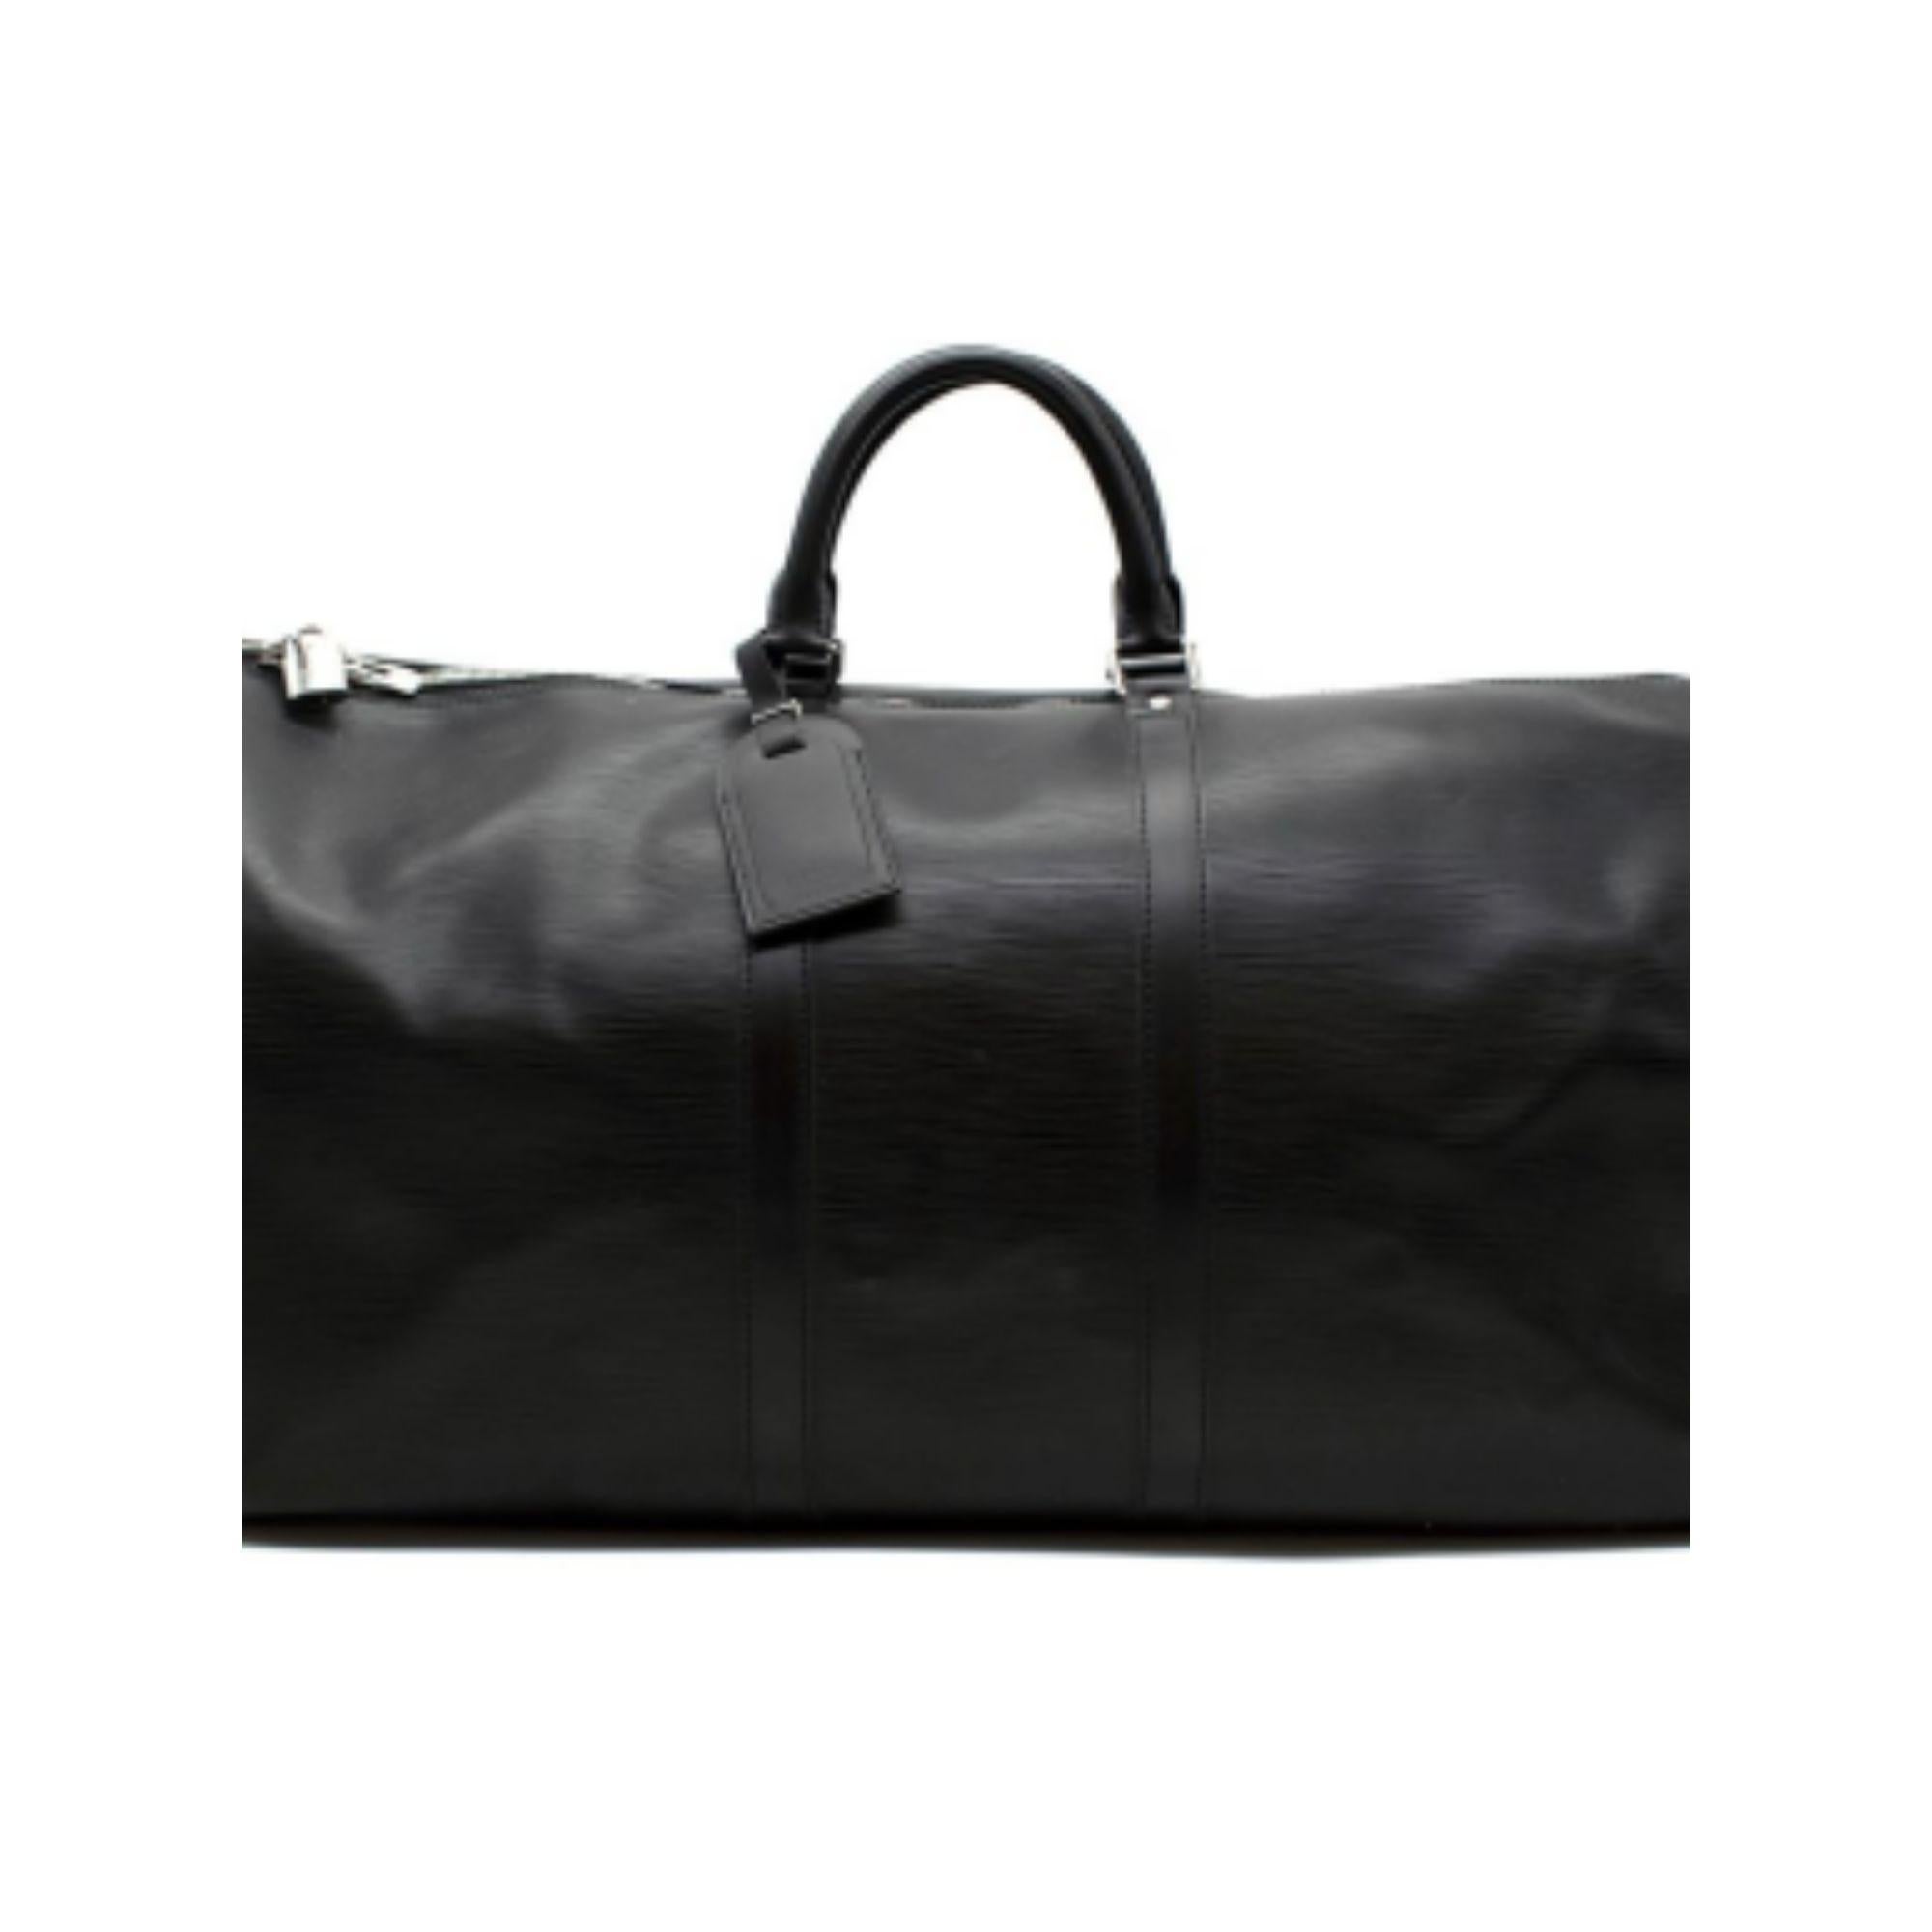 Louis Vuitton Black Epi Leather Keepall Bandoulière 55

-Silver tone hardware 
-Large capacity
-Cabin size
-Zip closure with padlock 
-Ultra-soft Taiga leather
-One main compartment 

Material: 

Leather 

Made in Italy 

9.5/10 excellent